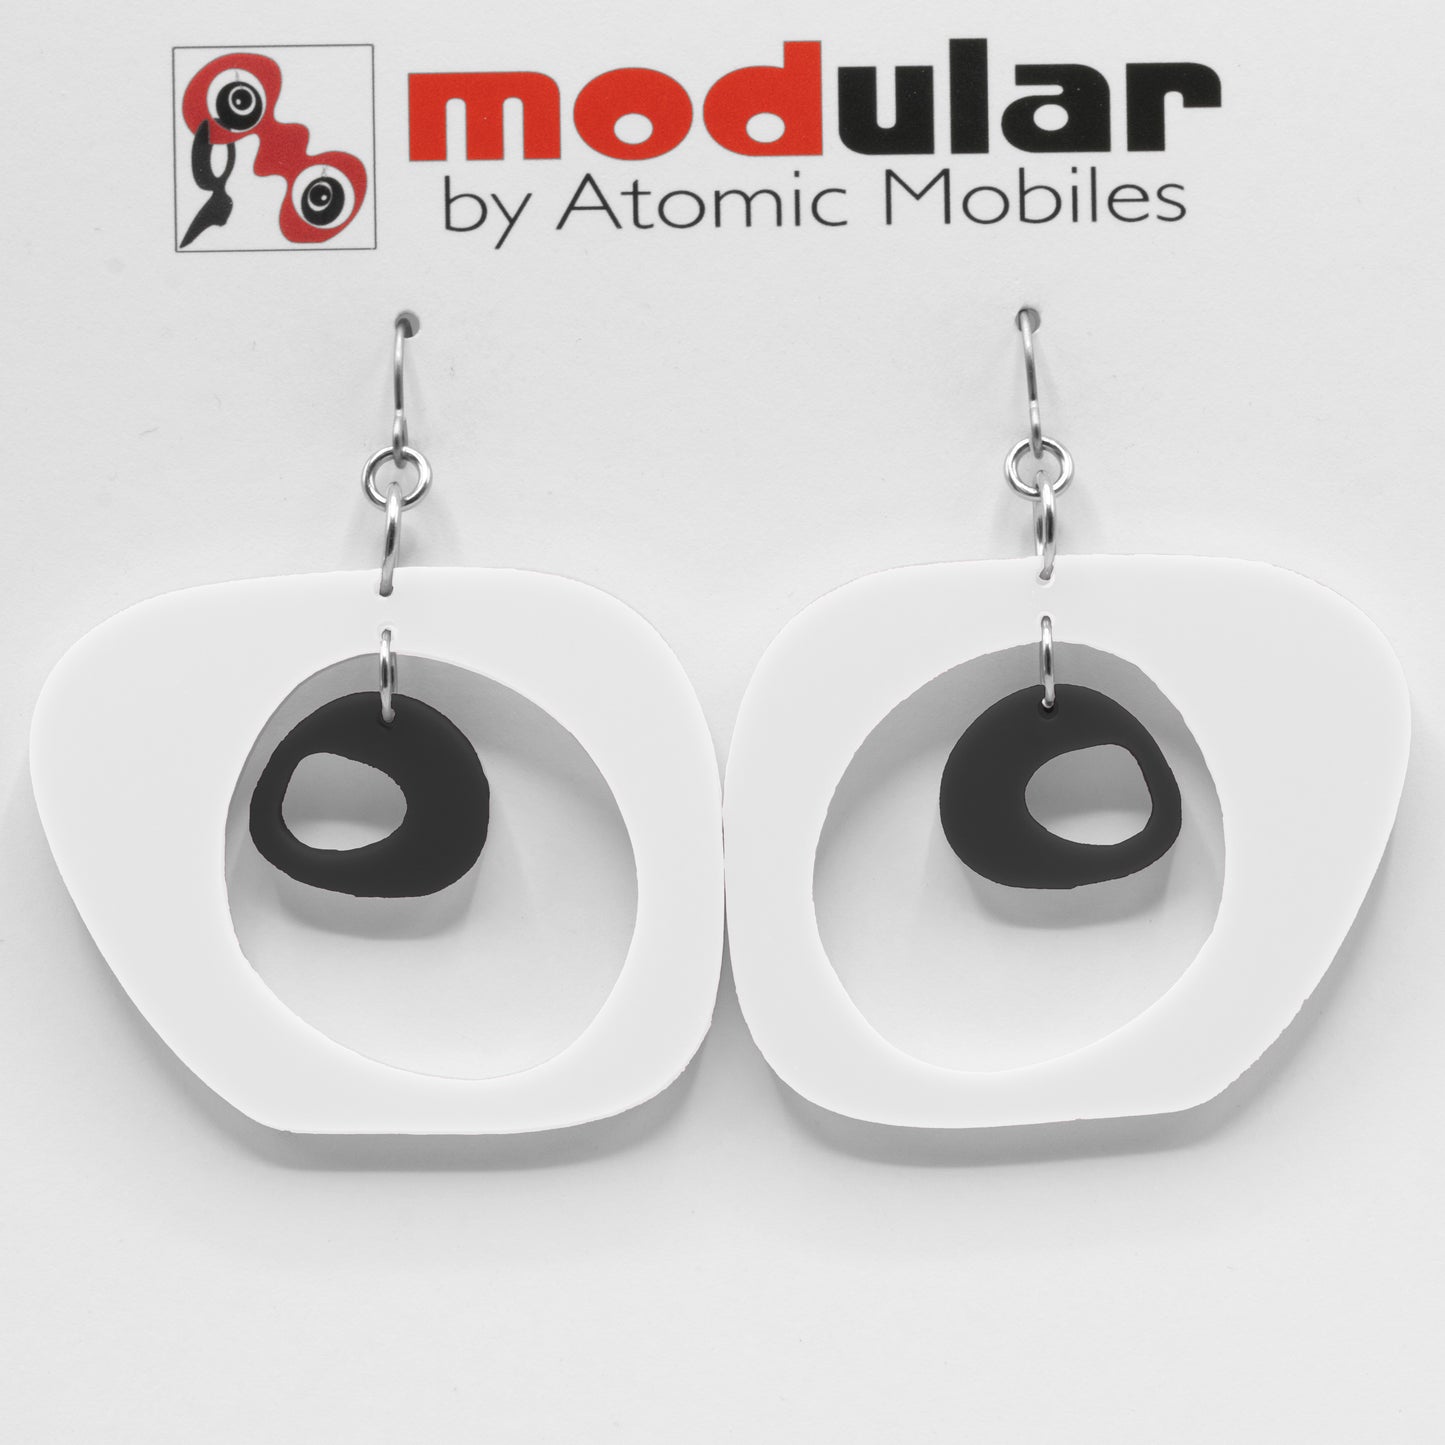 MODular Earrings - Paris Statement Earrings in White and Black by AtomicMobiles.com - retro era inspired mod handmade jewelry